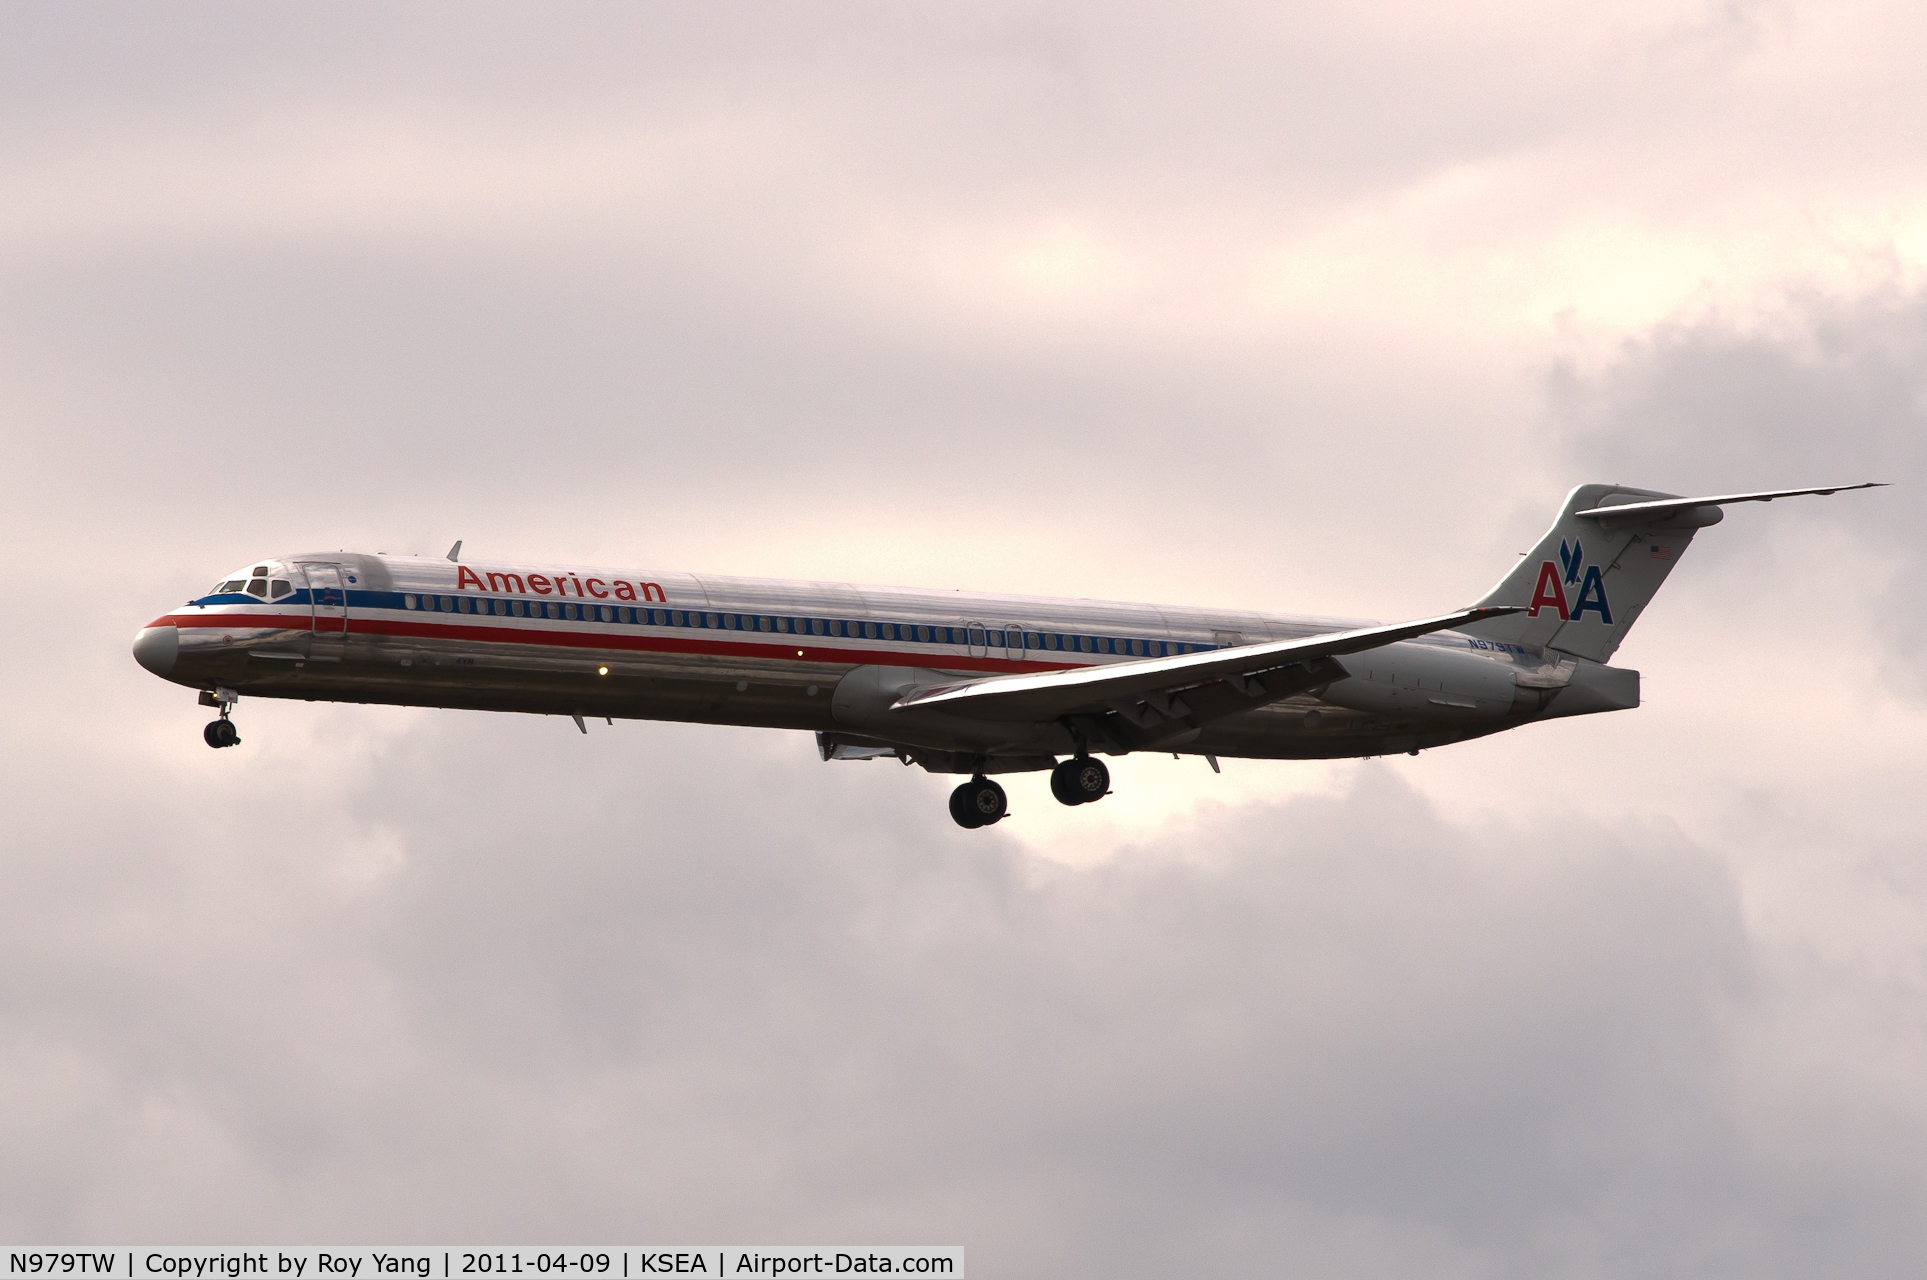 N979TW, 1999 McDonnell Douglas MD-83 (DC-9-83) C/N 53629, American Airlines MD-83